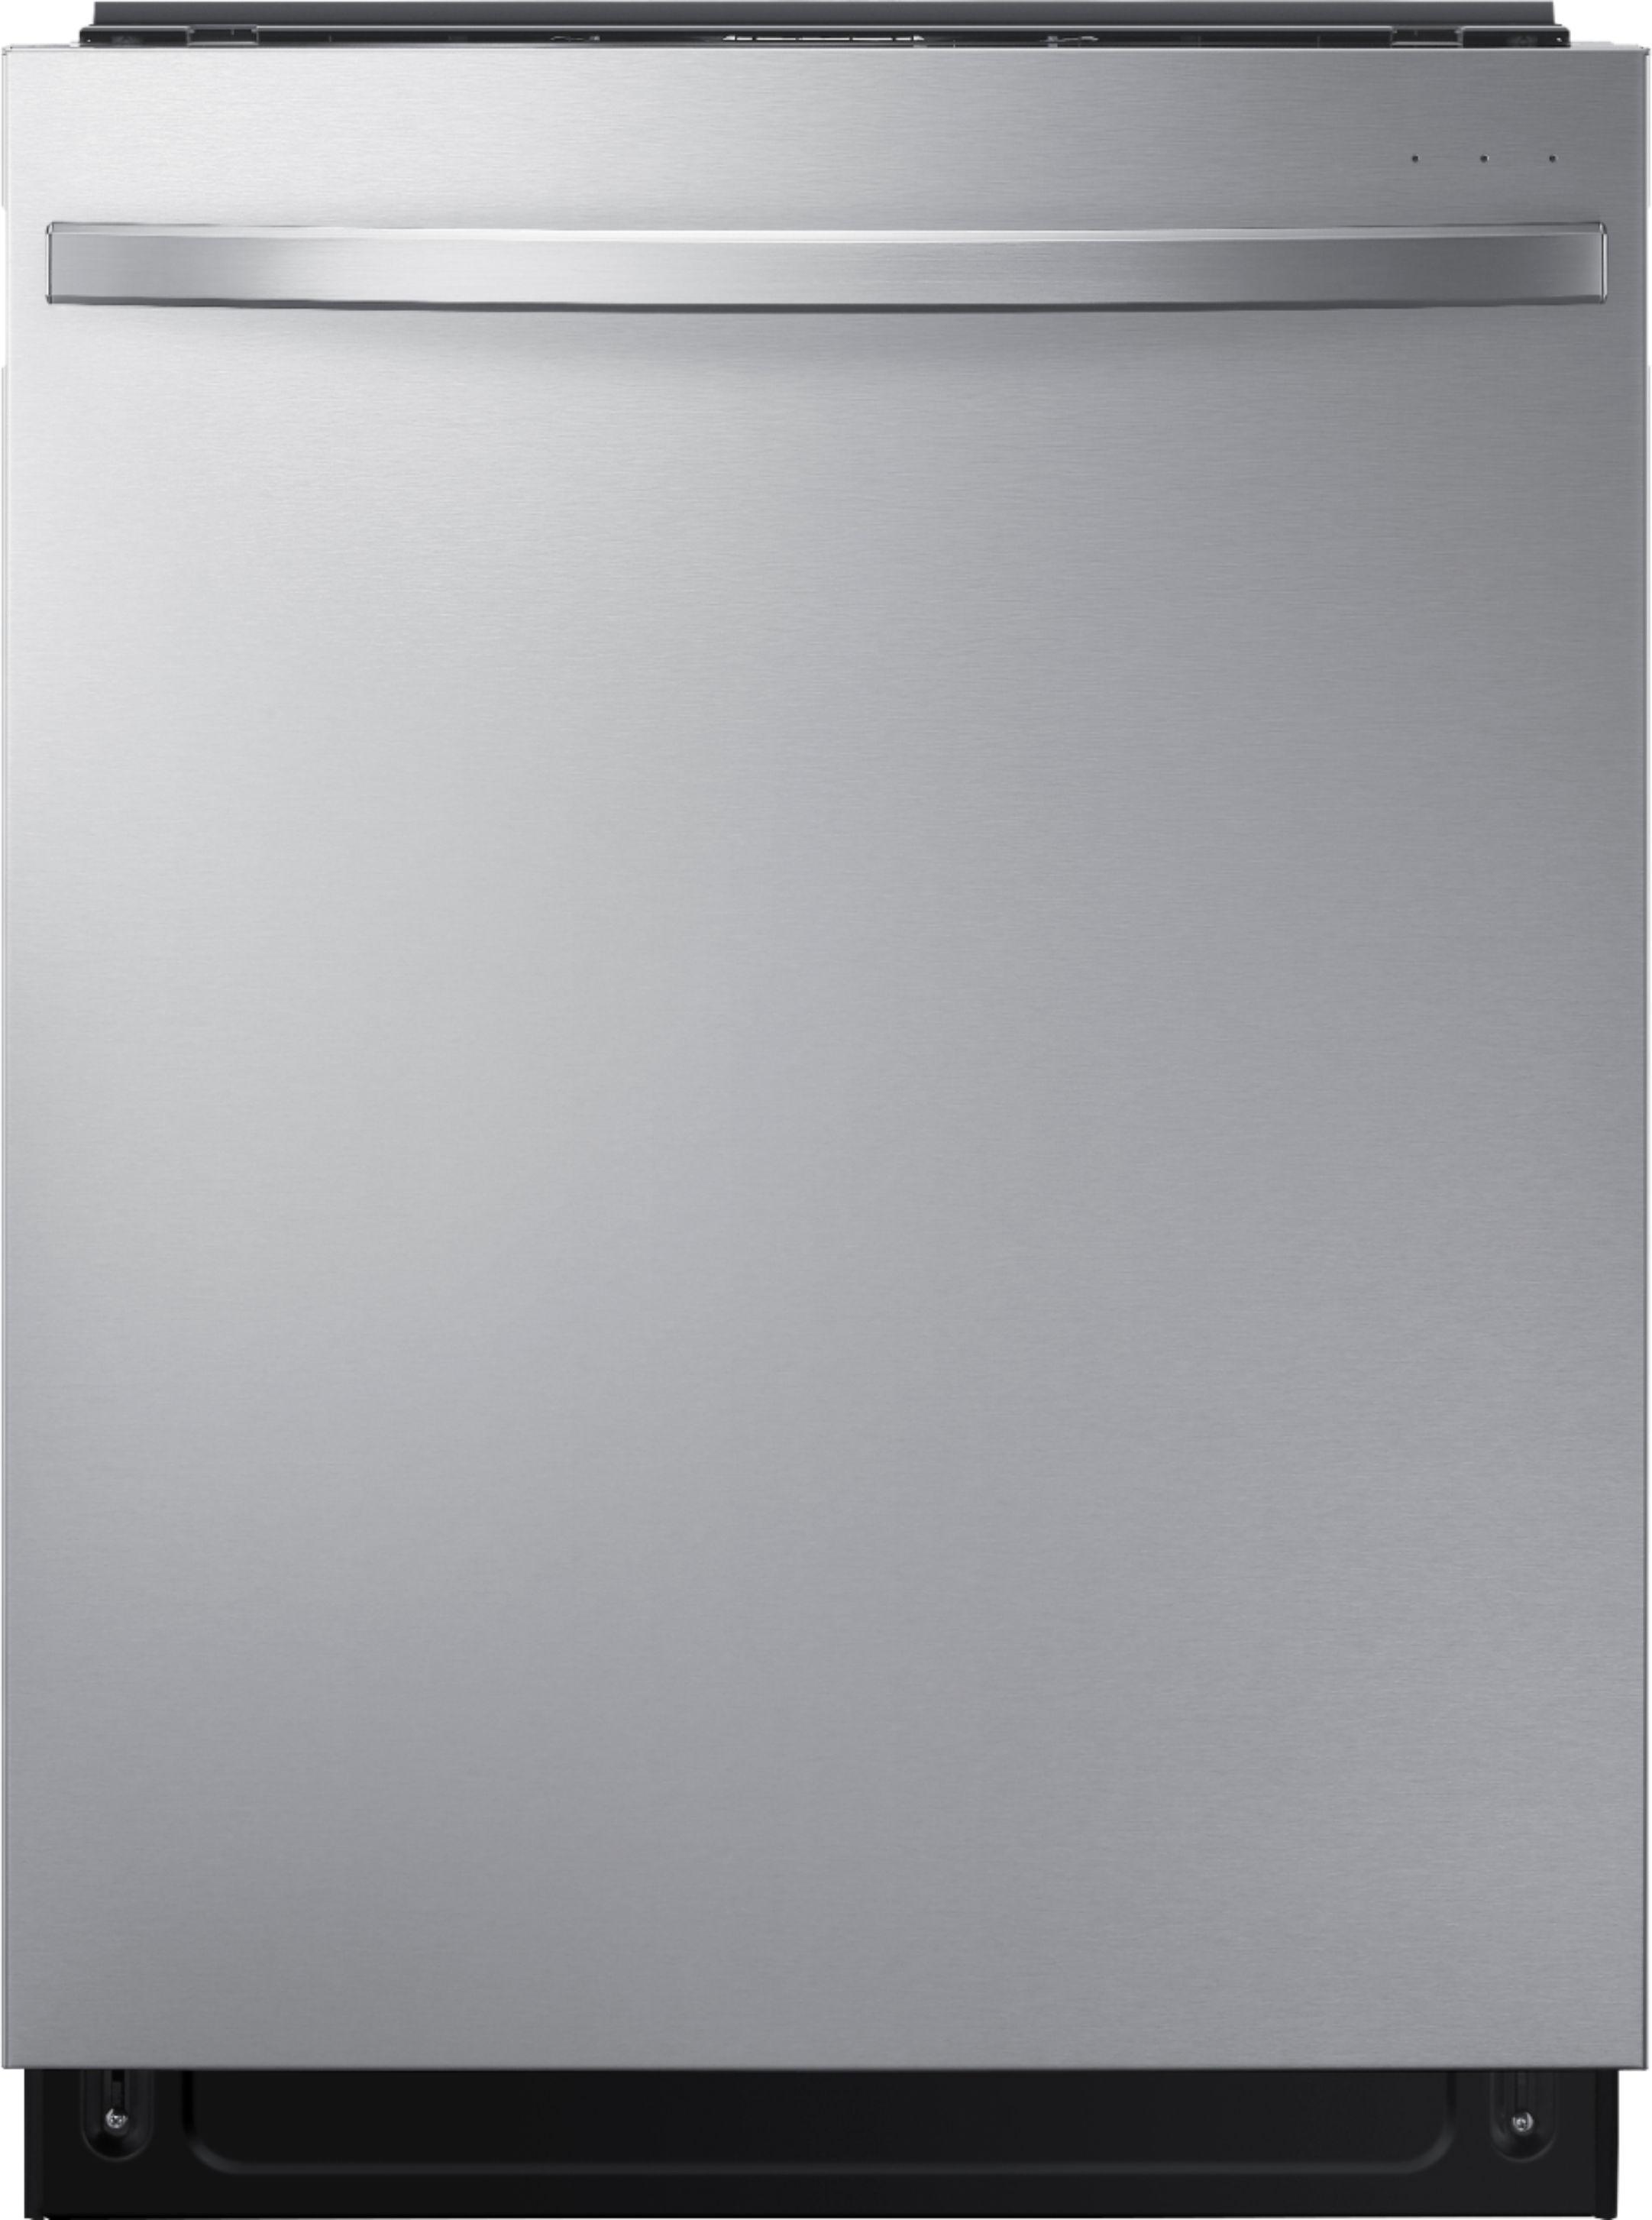 Samsung StormWash 24 Top Control Built-In Dishwasher with AutoRelease Dry,  3rd Rack, 48 dBA Stainless Steel DW80R5061US - Best Buy